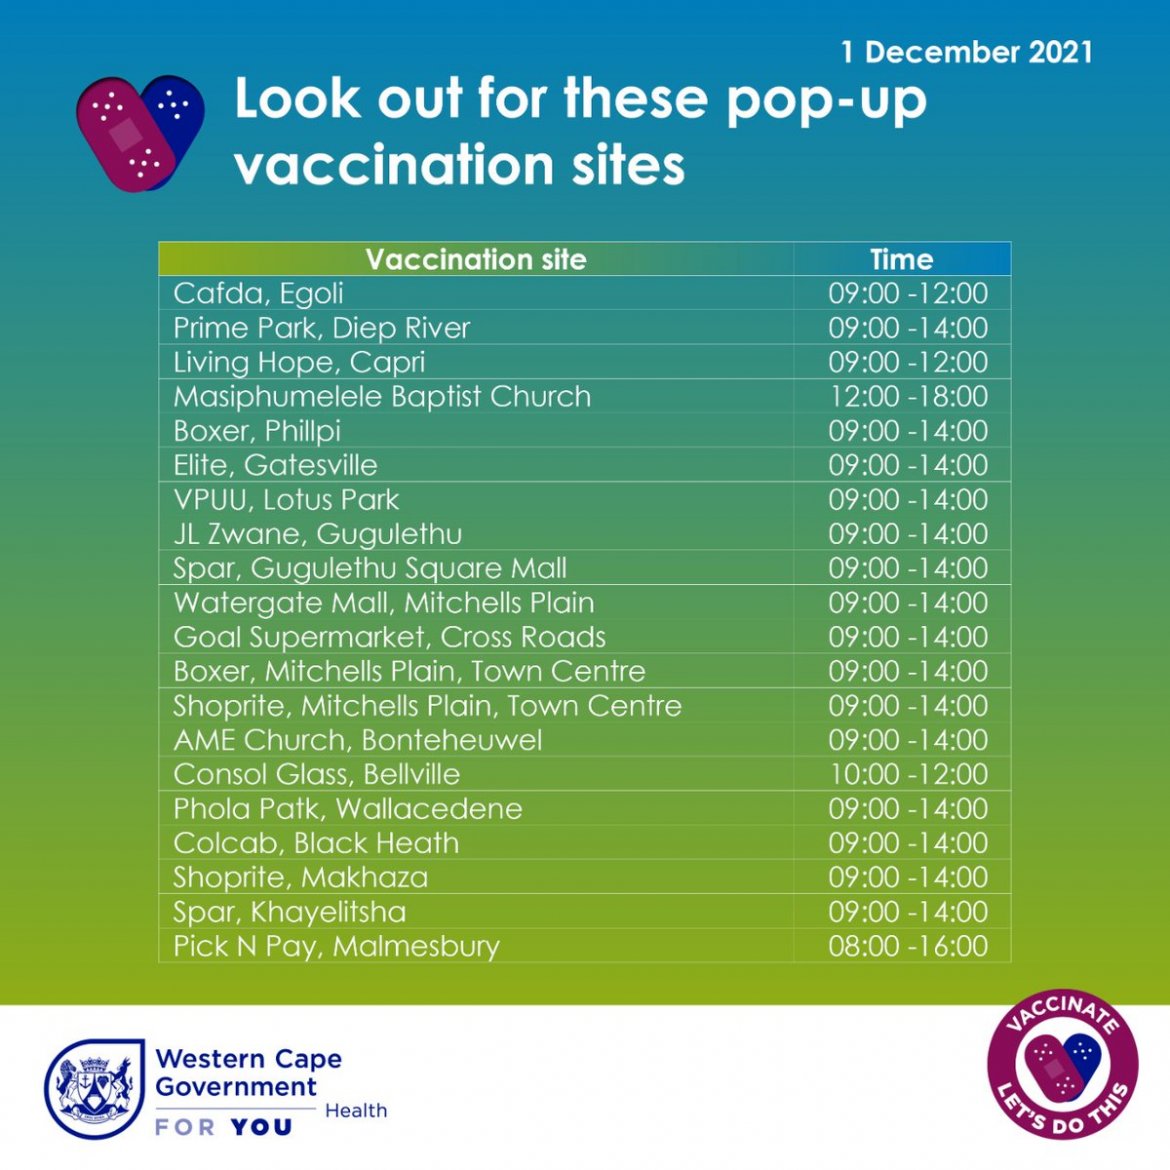 Pop-up vaccination sites open for you on 1st of Dec 2021 FFgX5-nWUA0VIBP.jpg